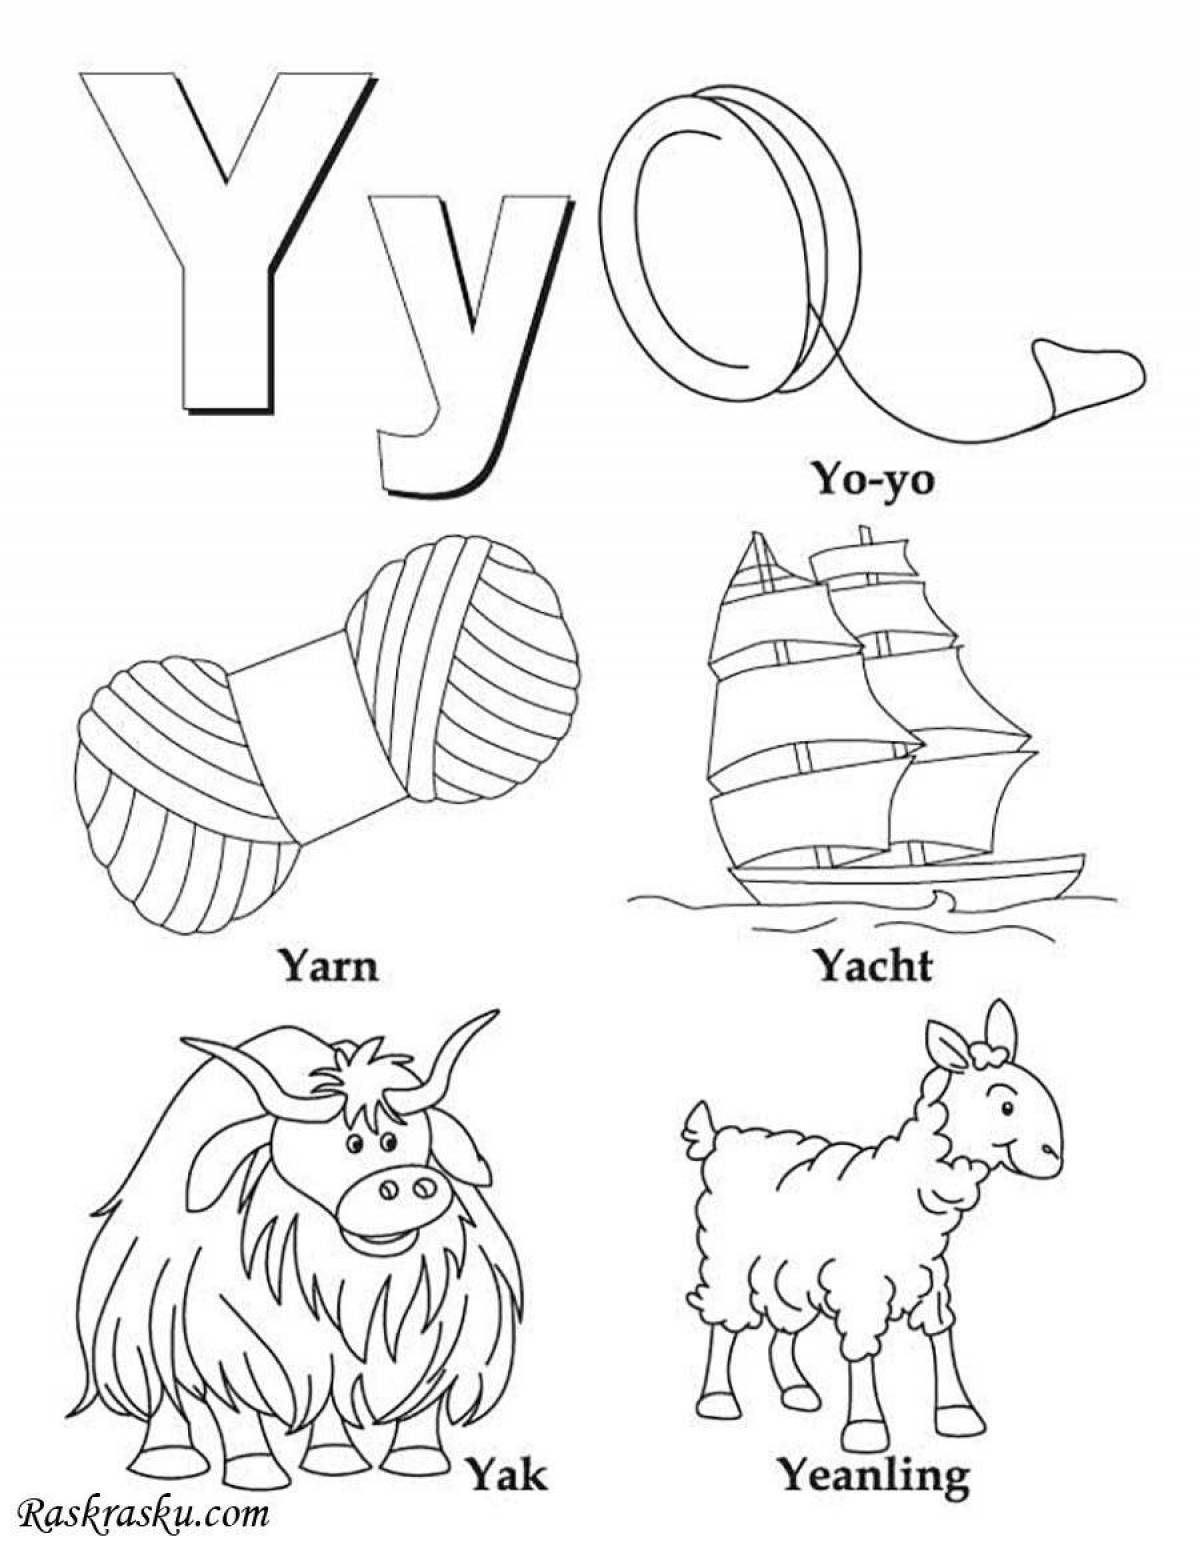 English alphabet in pictures #6